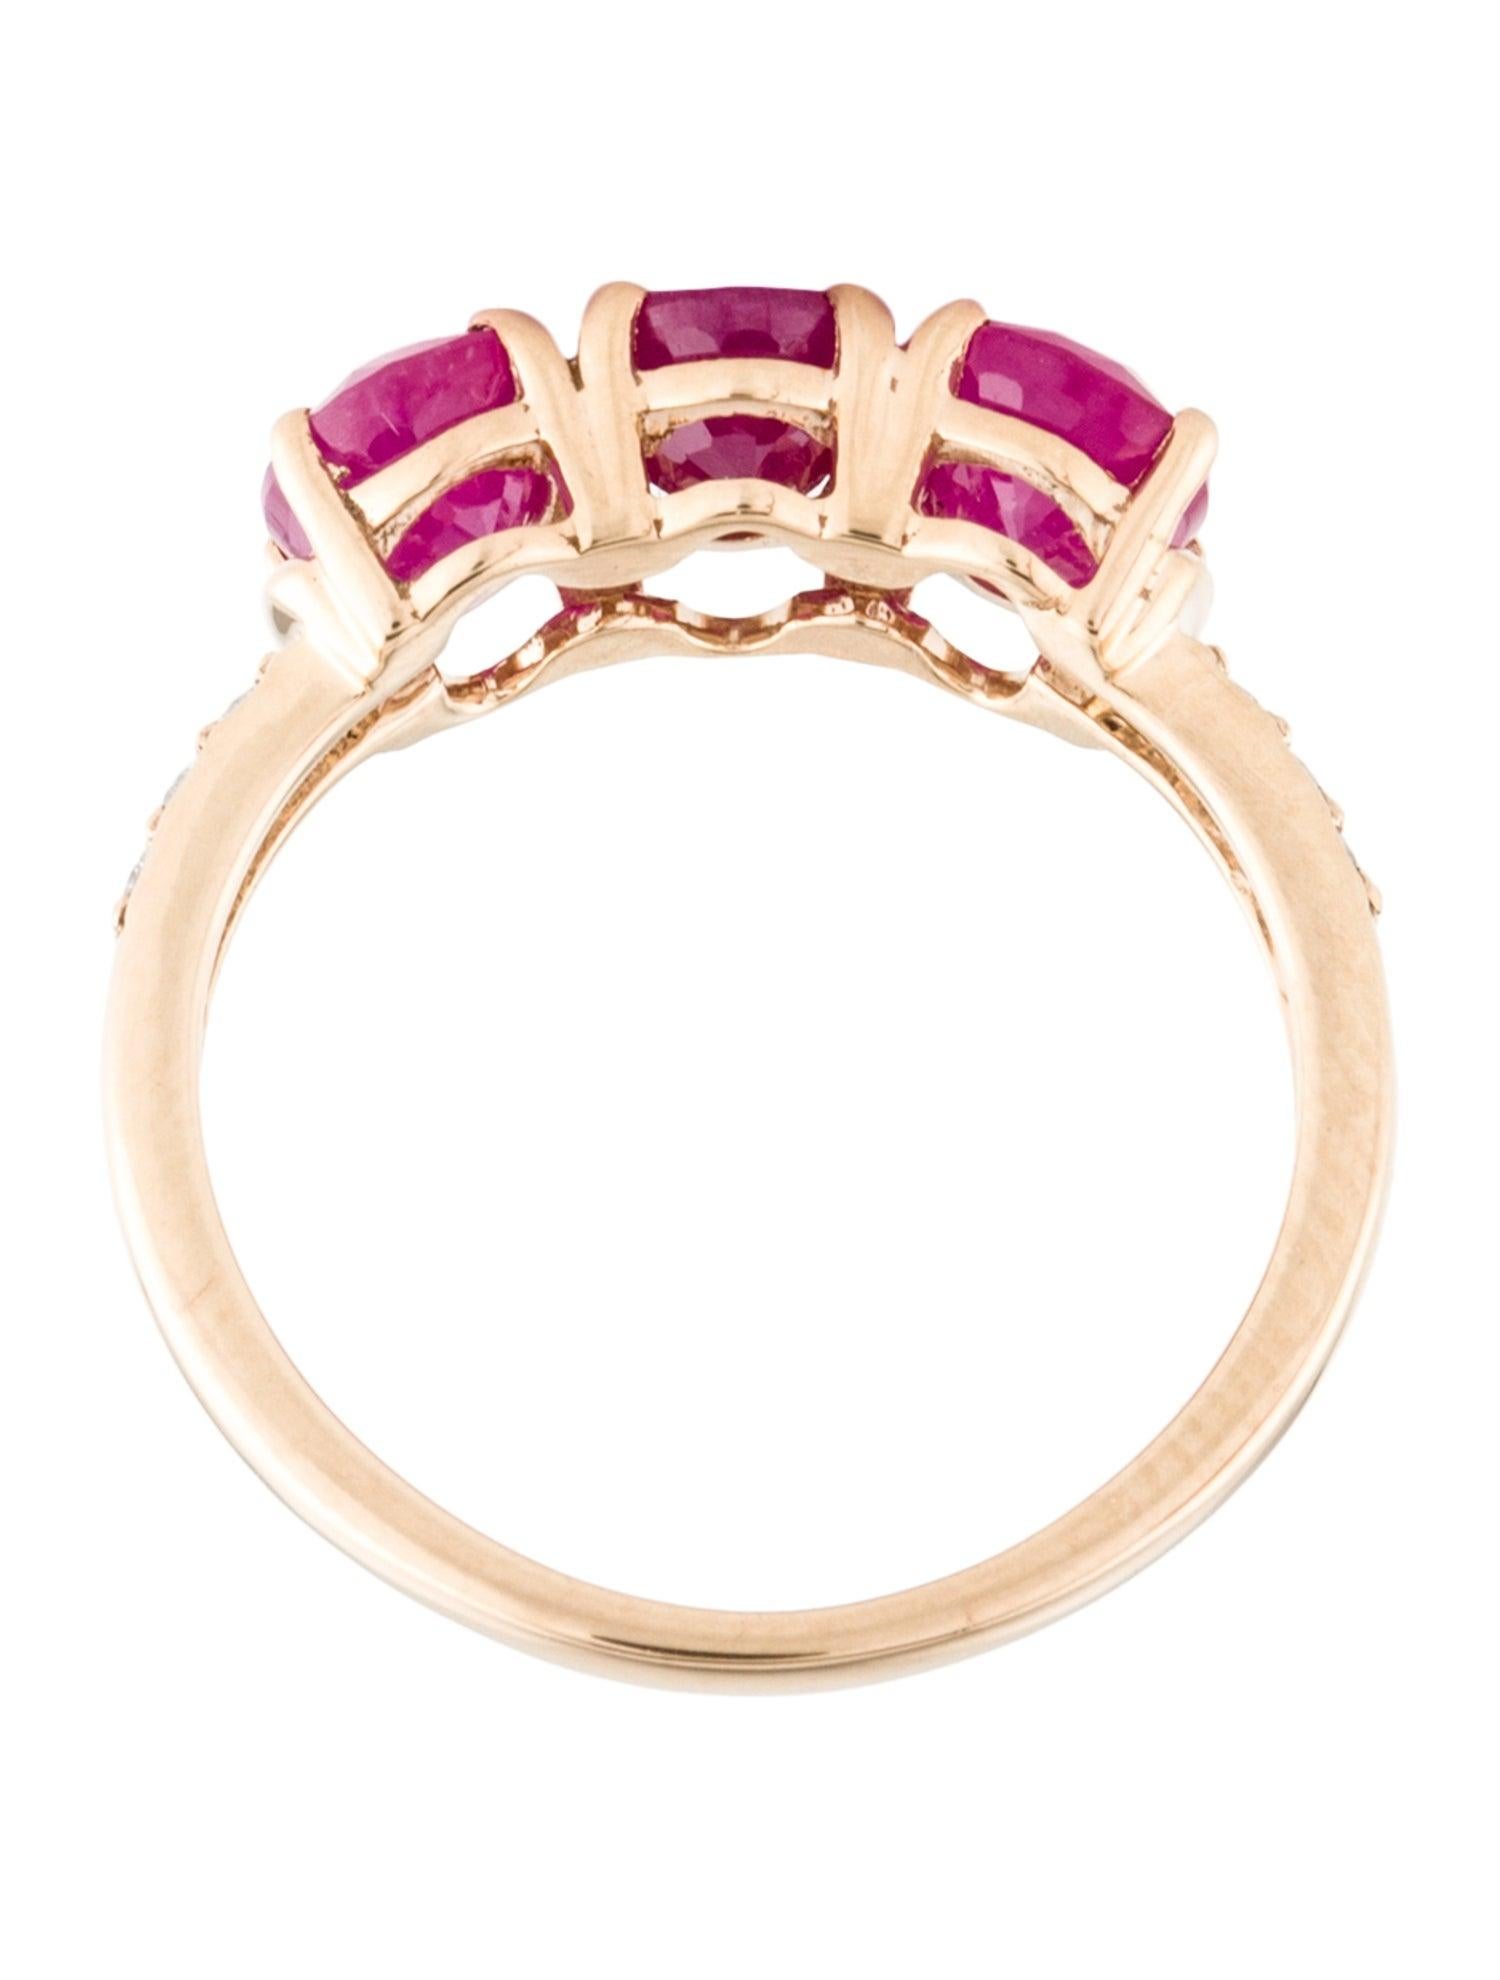 Luxurious 14K Ruby & Diamond Cocktail Band Ring - Size 6.75 - Statement Jewelry In New Condition For Sale In Holtsville, NY